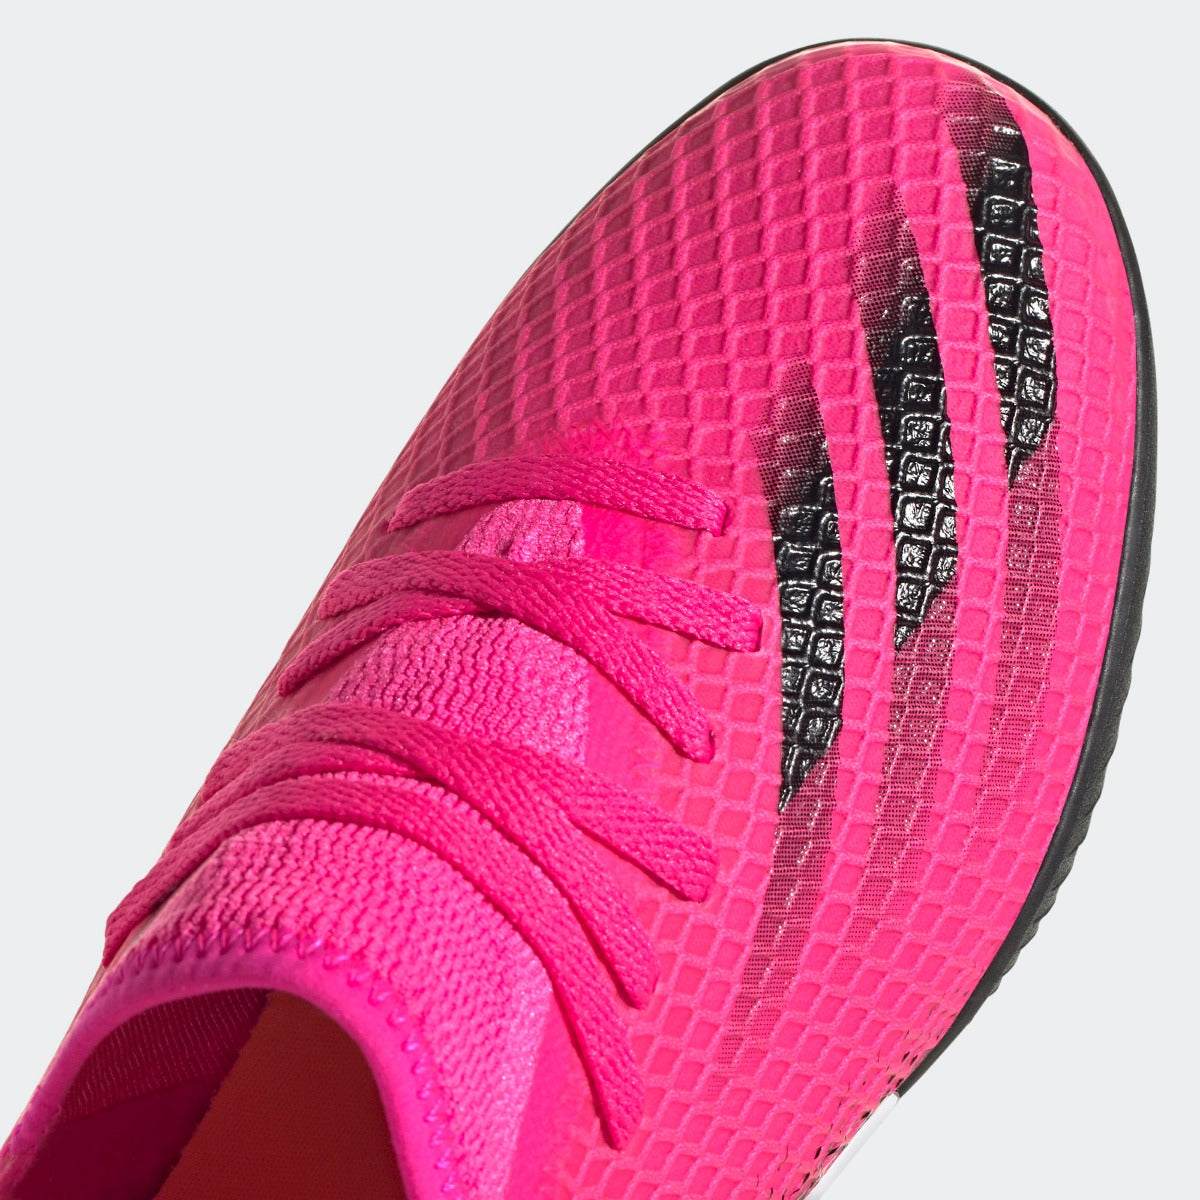 Adidas X Ghosted .3 JR TF - Pink-Black  (Detail 1)